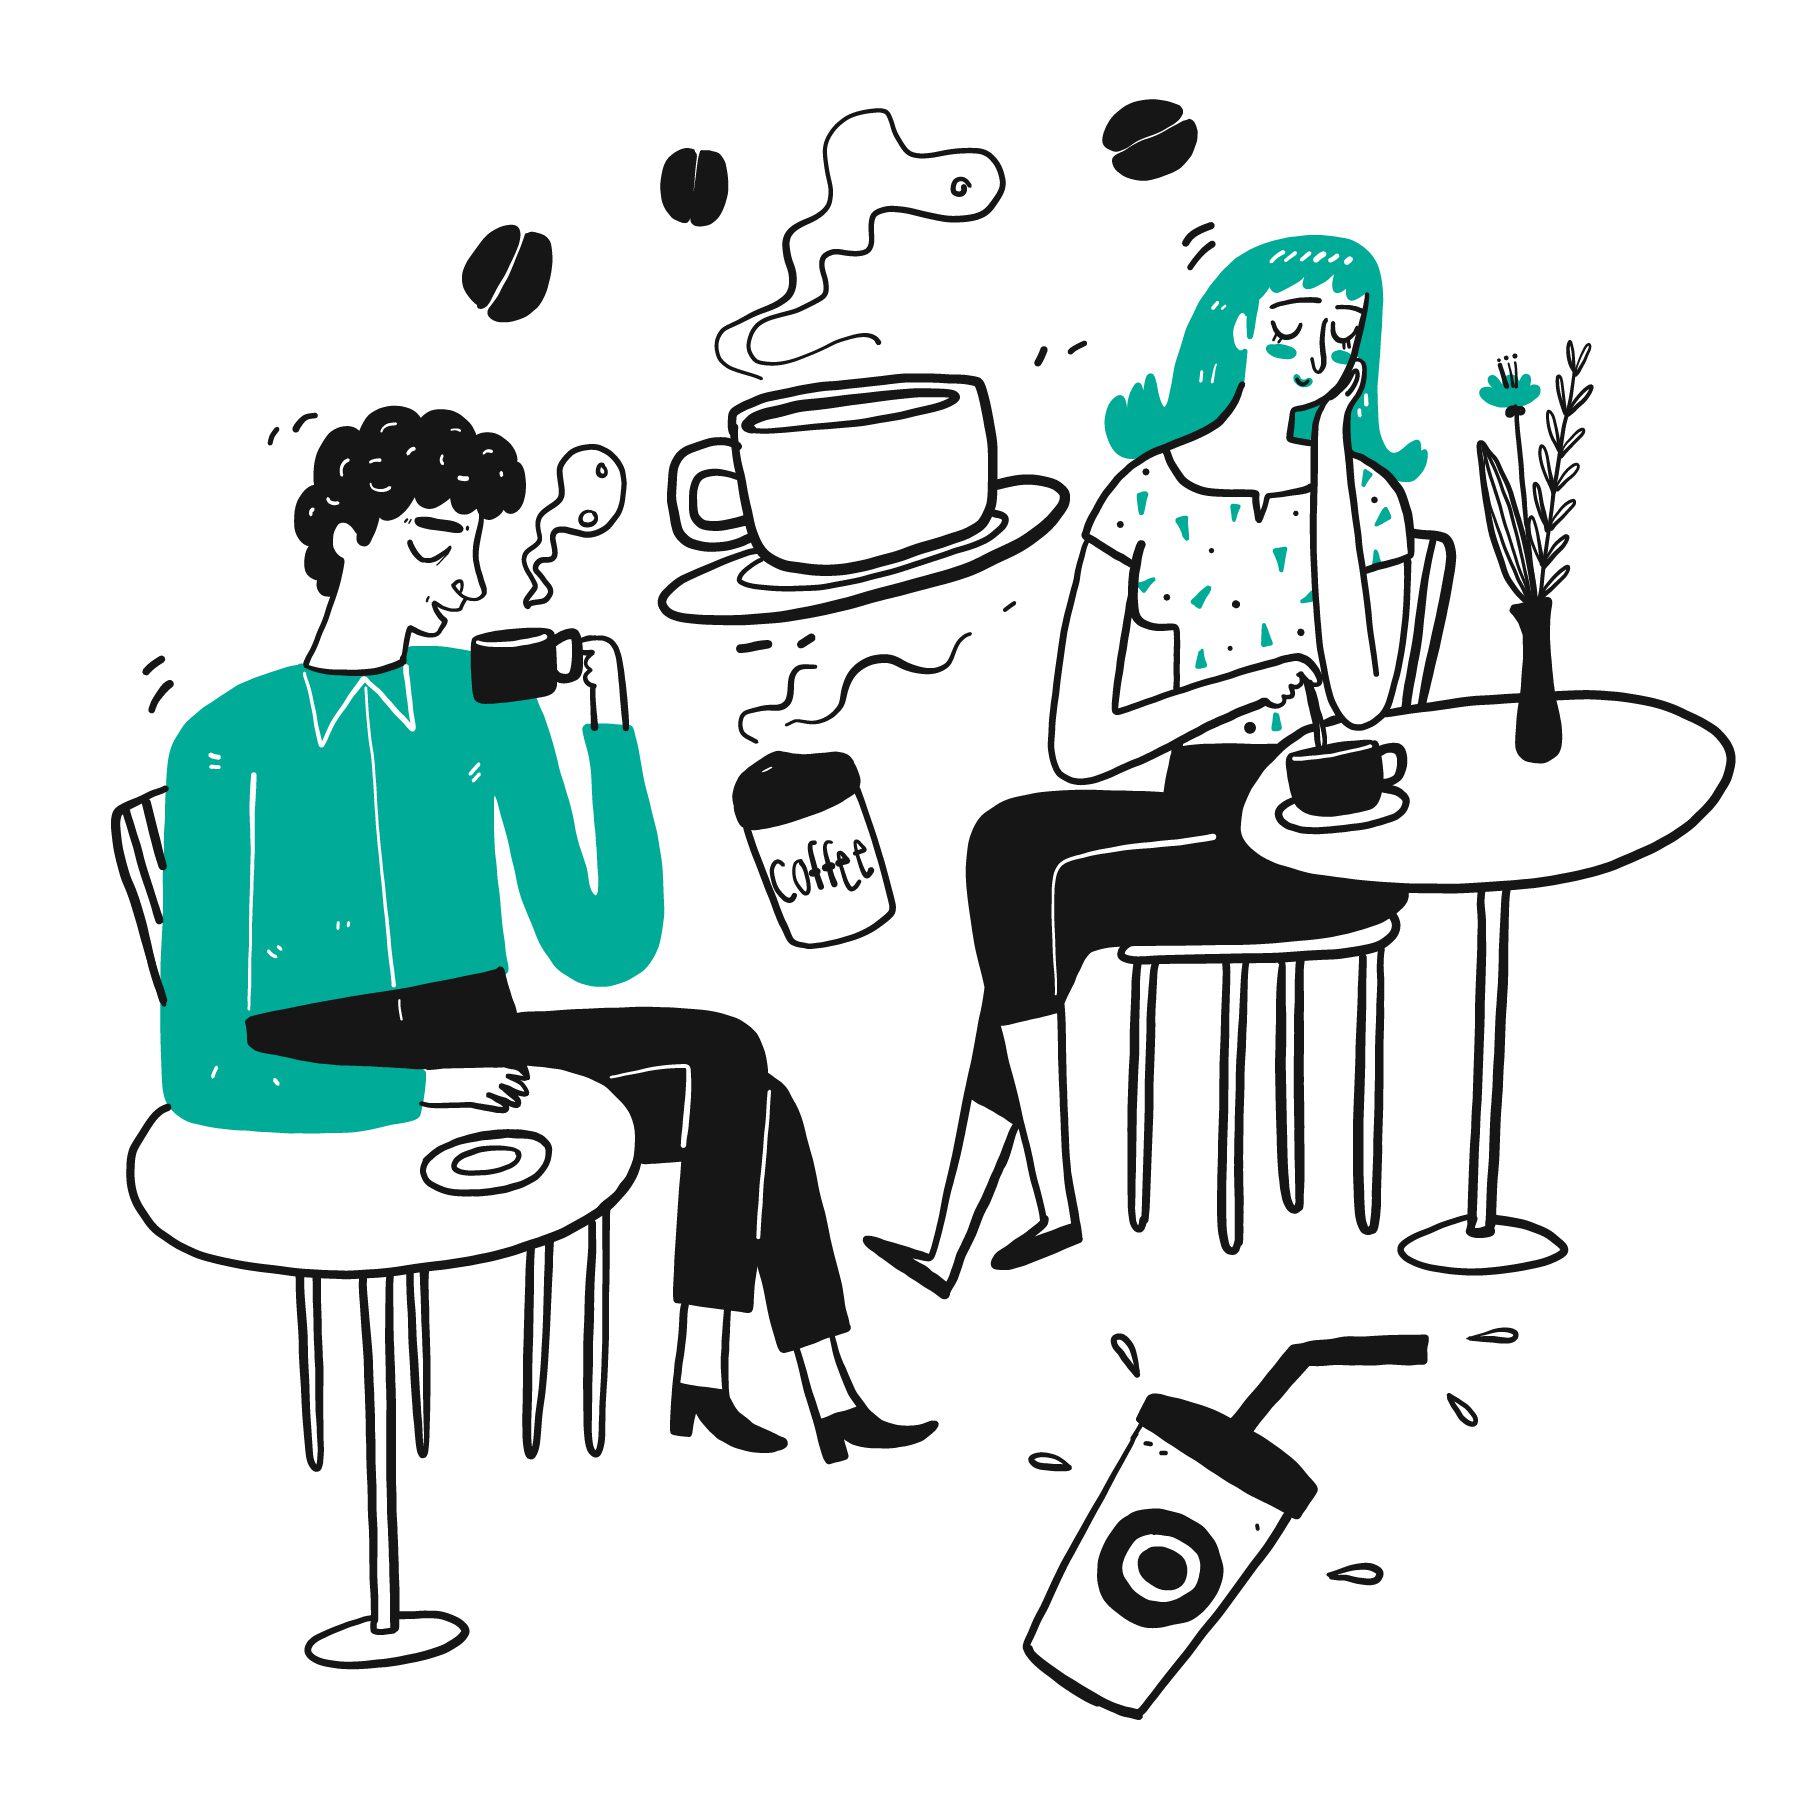 Illustration of people drinking coffee to promote the community café at Petaurai Centre in Brough, East Yorkshire